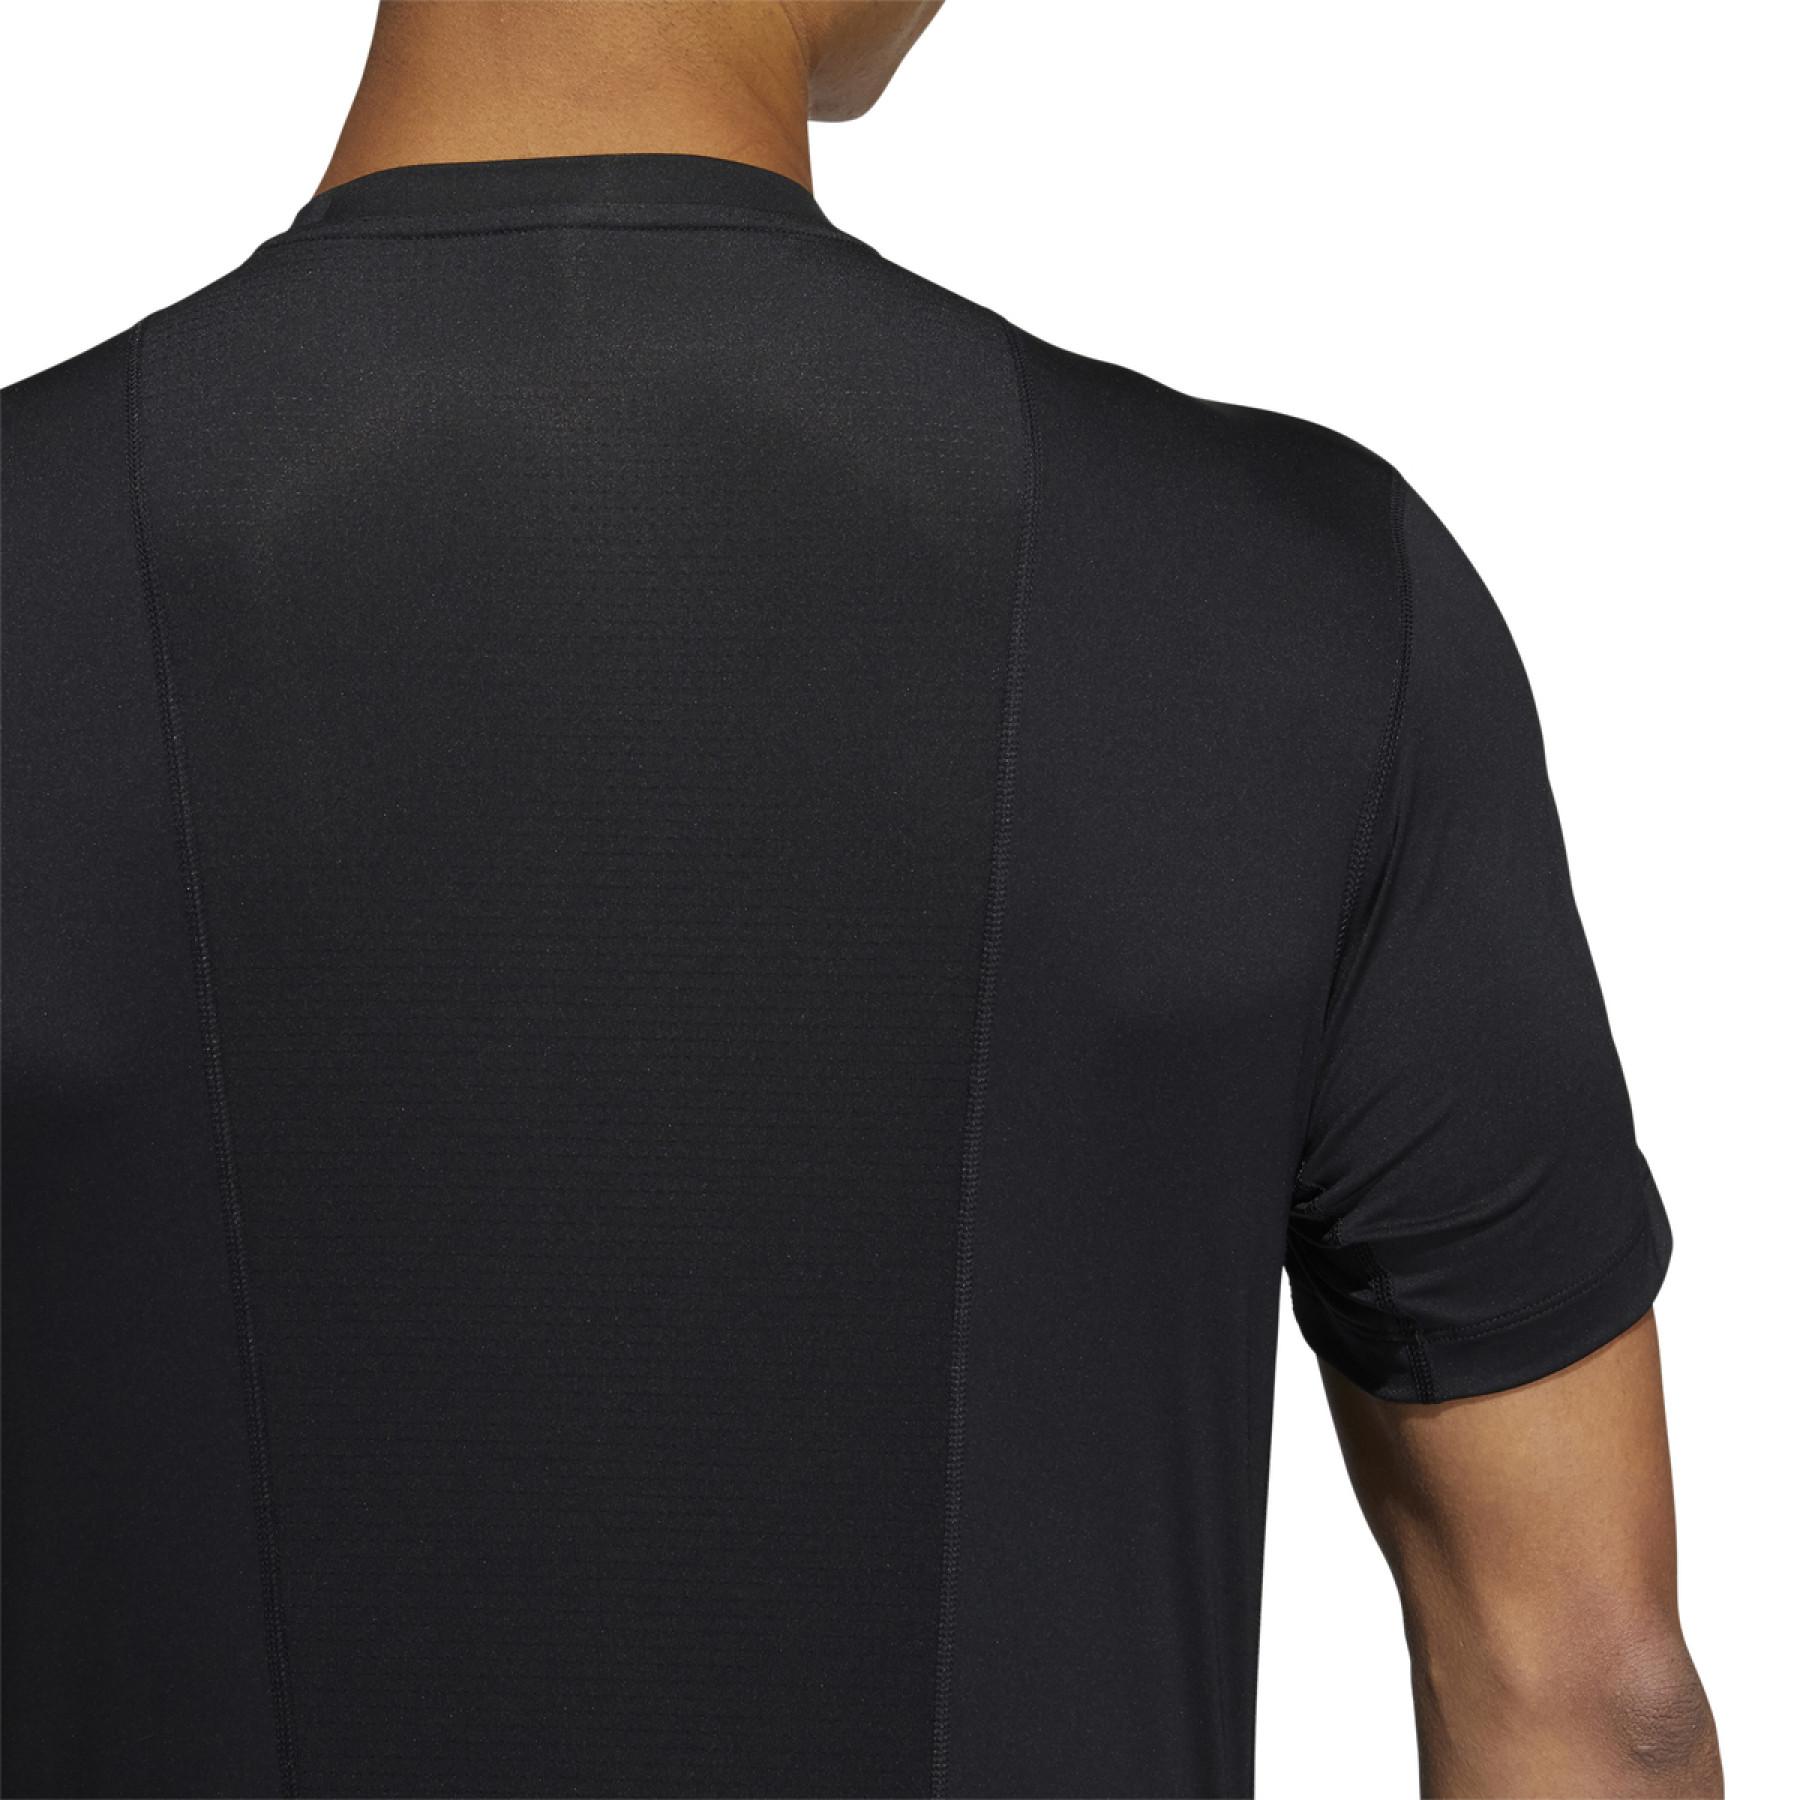 T-shirt adidas Techfit Fitted 3-Bandes